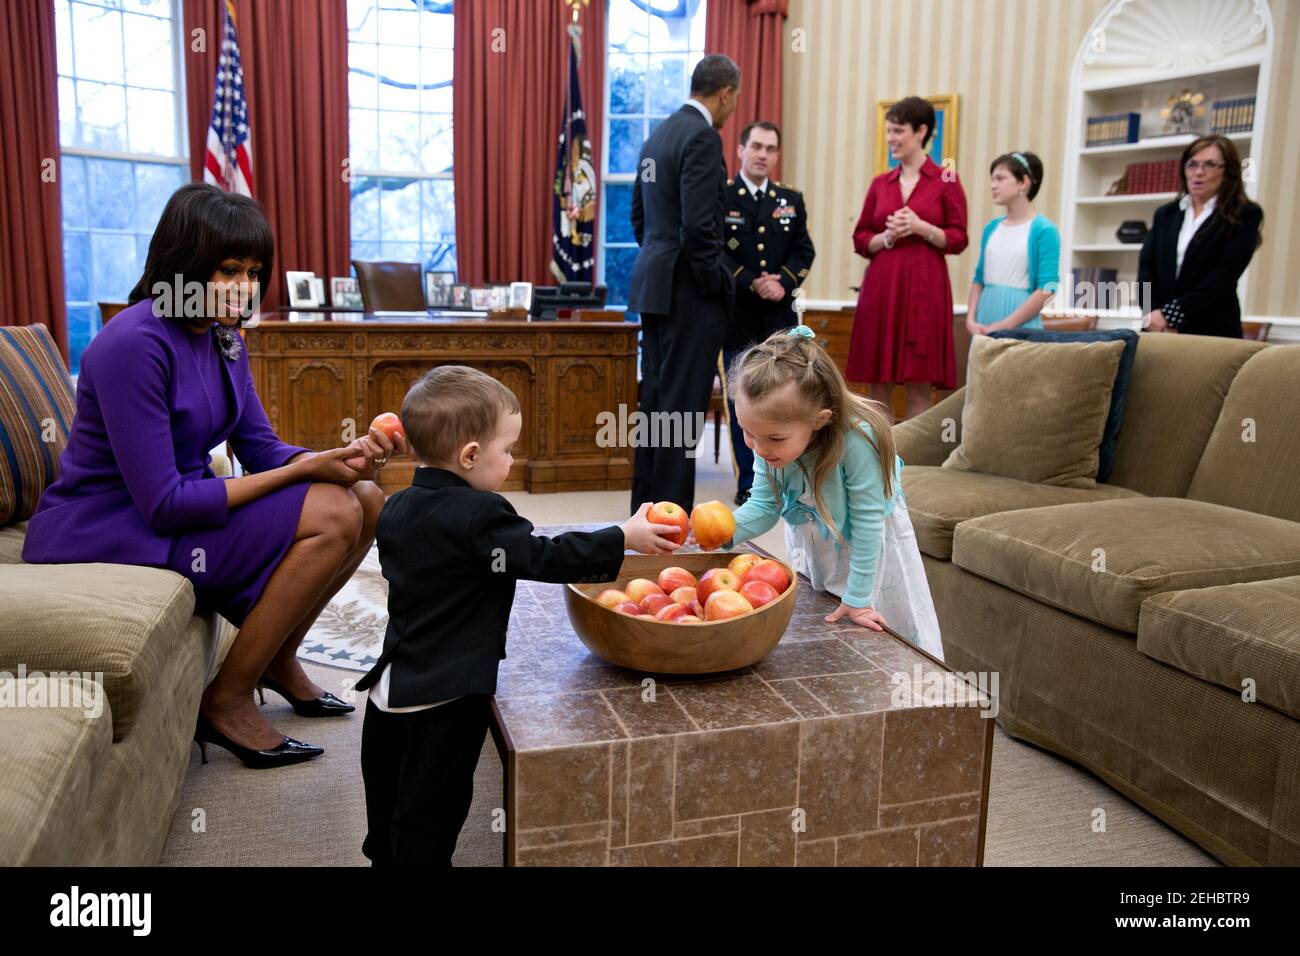 President Barack Obama and First Lady Michelle Obama visit with former Staff Sergeant Clinton Romesha and his family in the Oval Office prior to a ceremony to award Romesha the Medal of Honor, Feb. 11, 2013.  Remesha's family members, from left, are: son Colin Romesha, 2; daughter Gwen Romesha, 4;  wife Tammy Romesha, daughter Dessi Romesha, 11; and mother Tish Rogers. Stock Photo